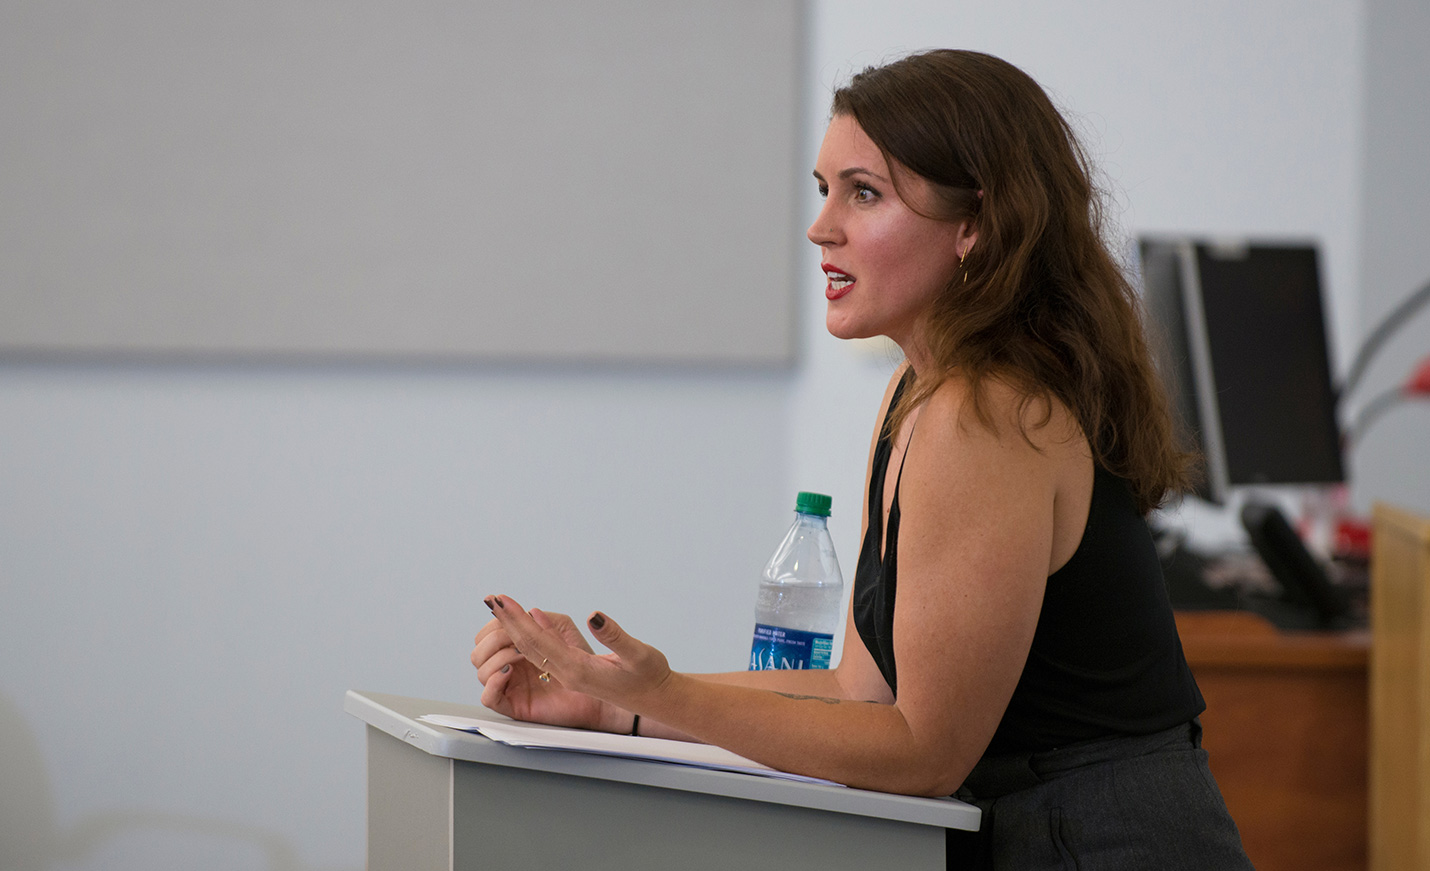 An instructor stands at a lectern with a bottle of water next to her